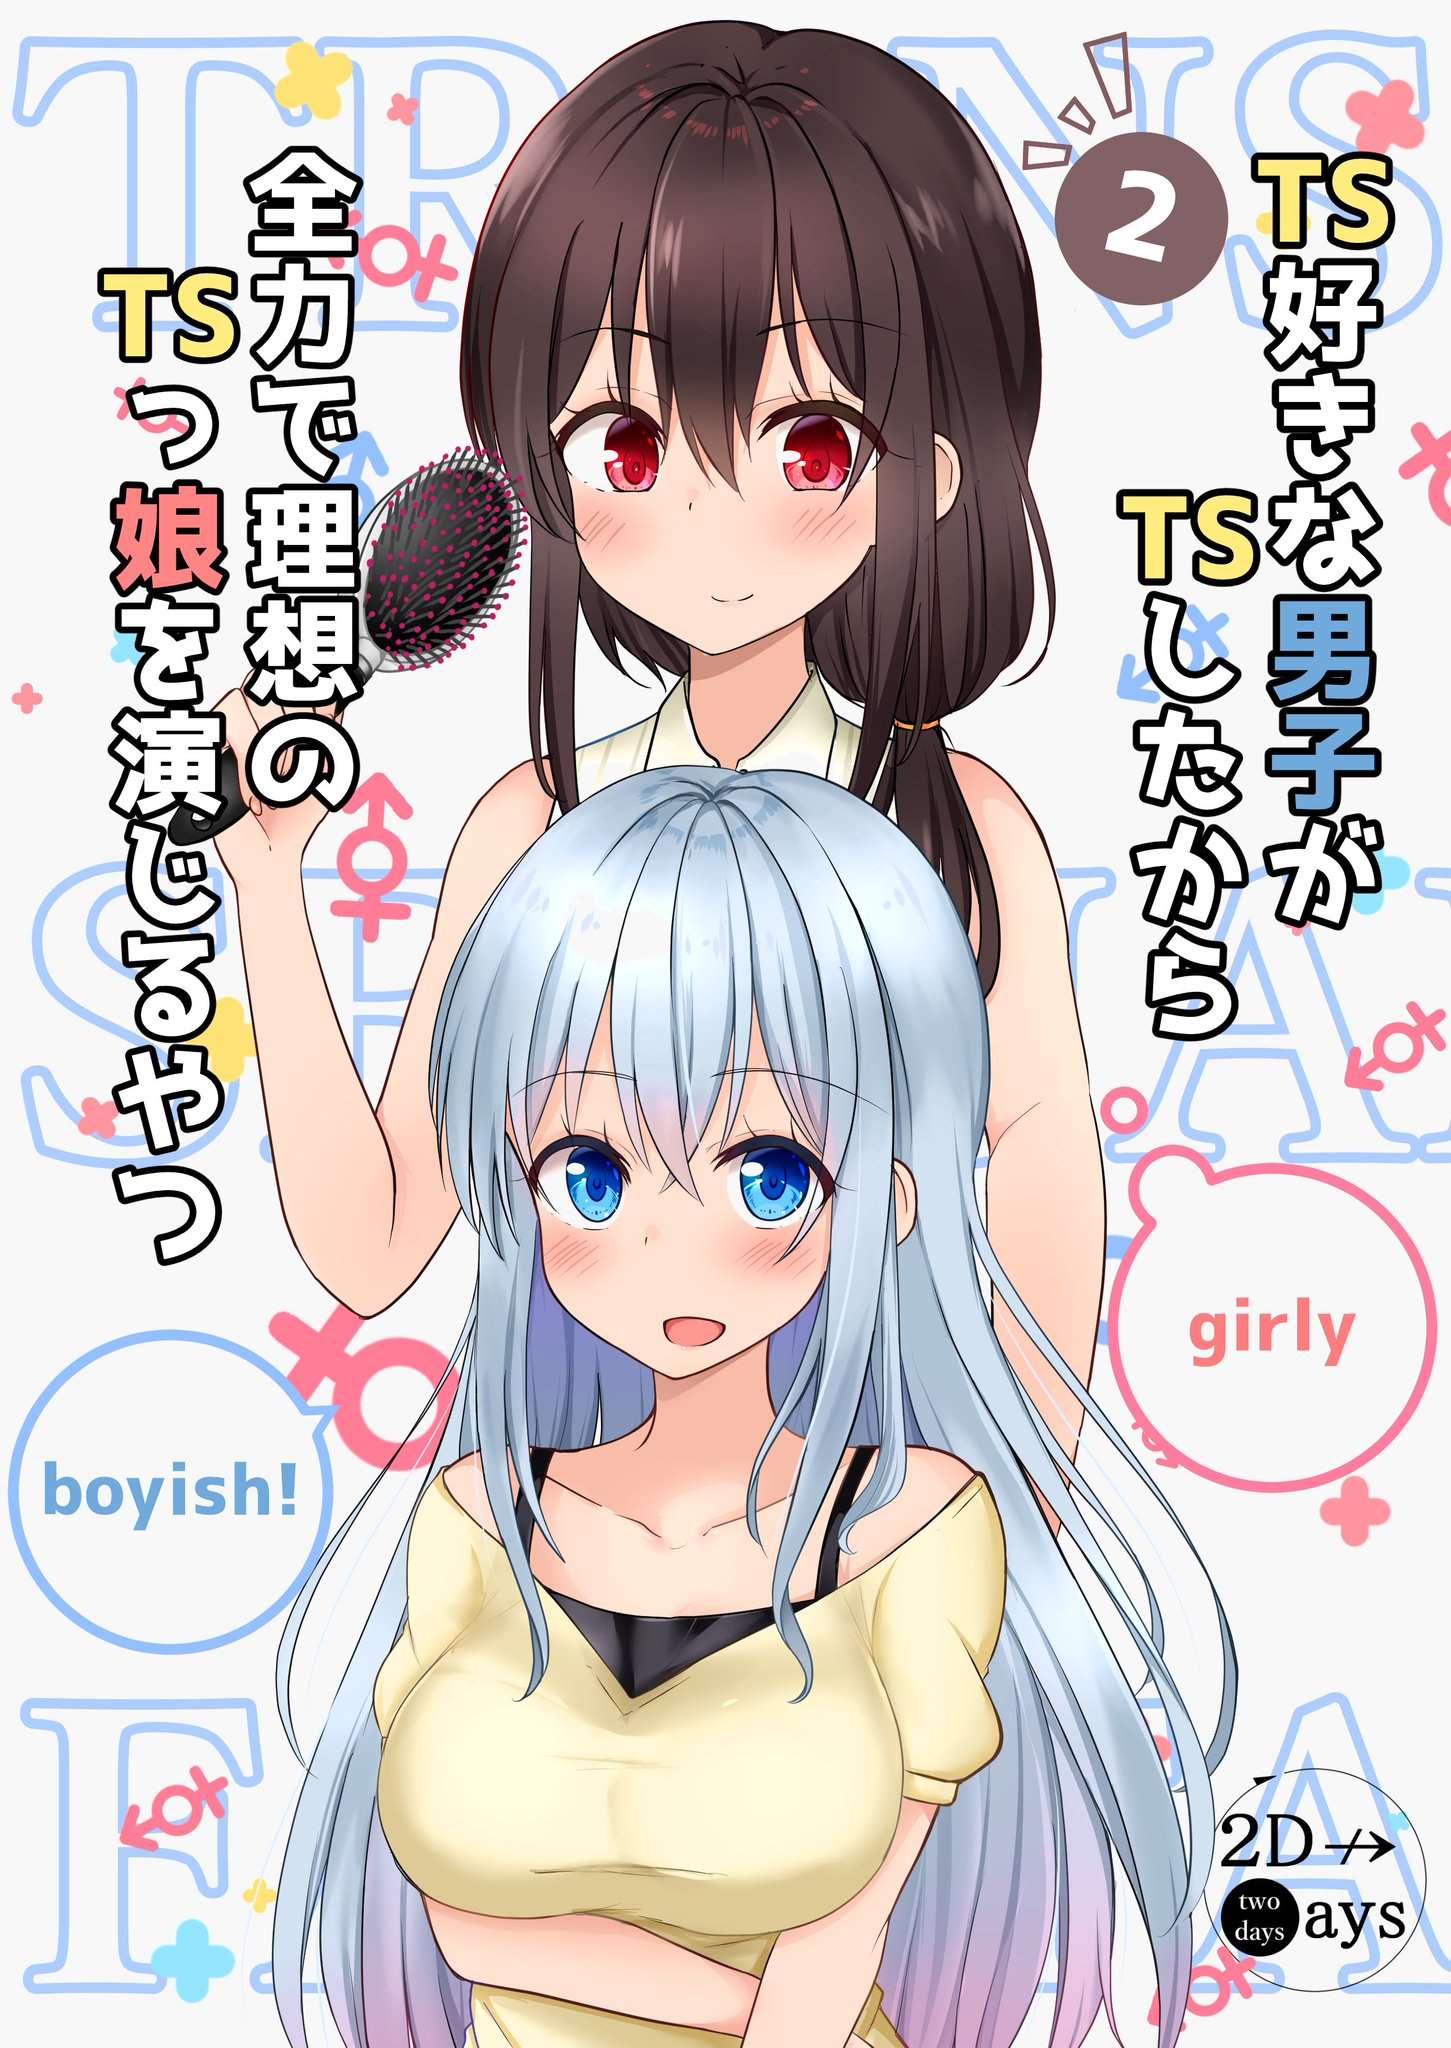 A Boy Who Loves Genderswap Got Genderswapped, So He Acts Out His Ideal Genderswap Girl Manga